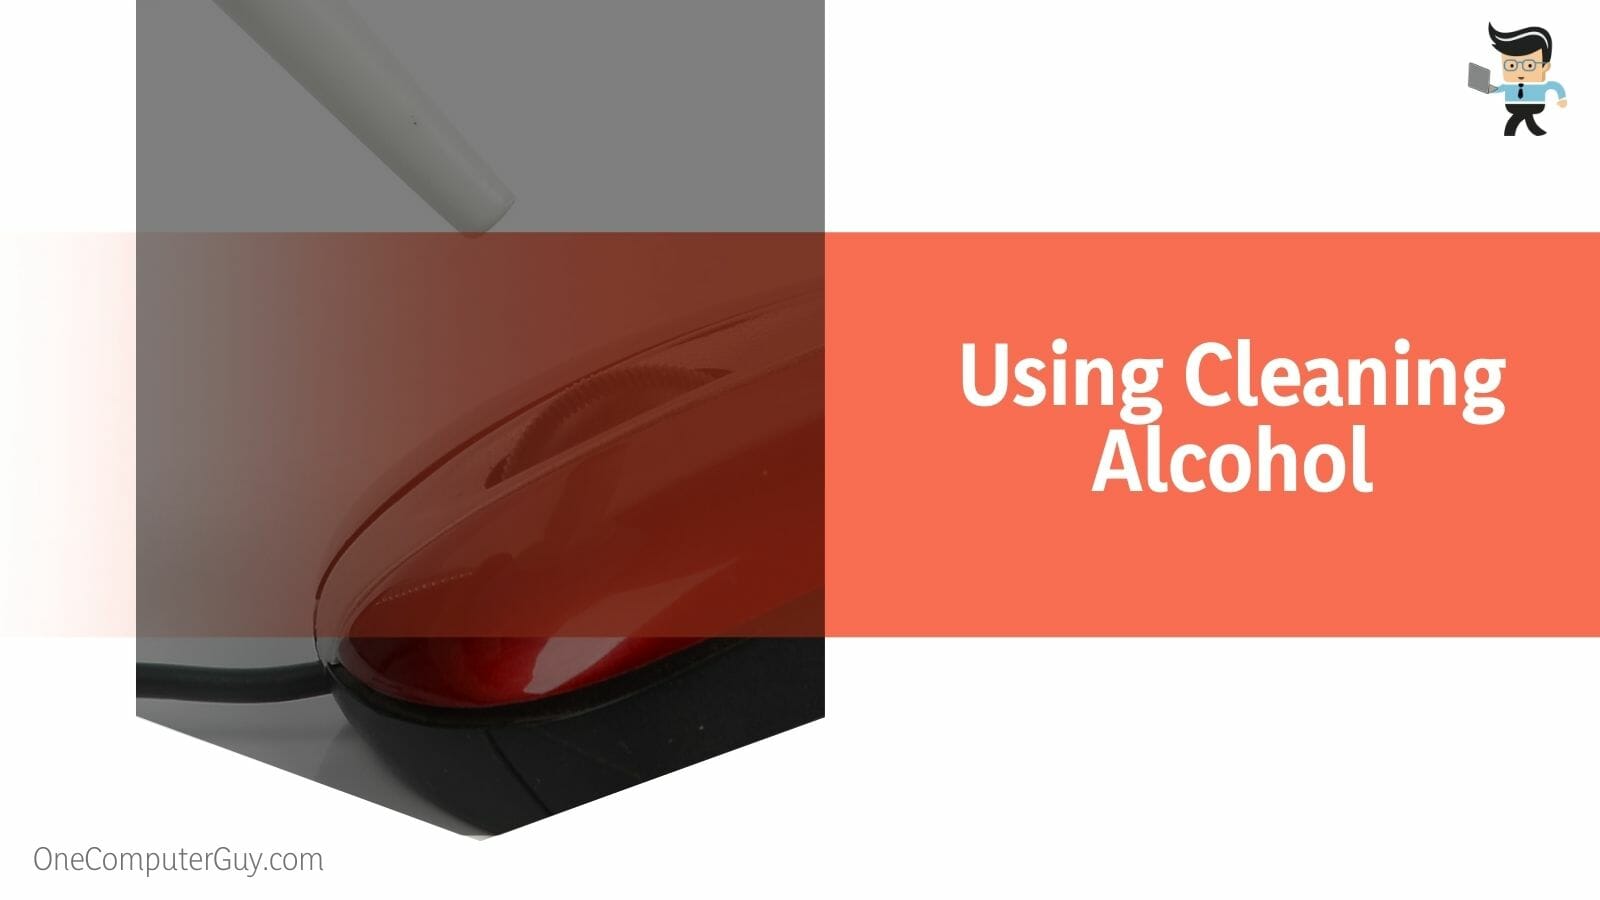 Using Cleaning Alcohol